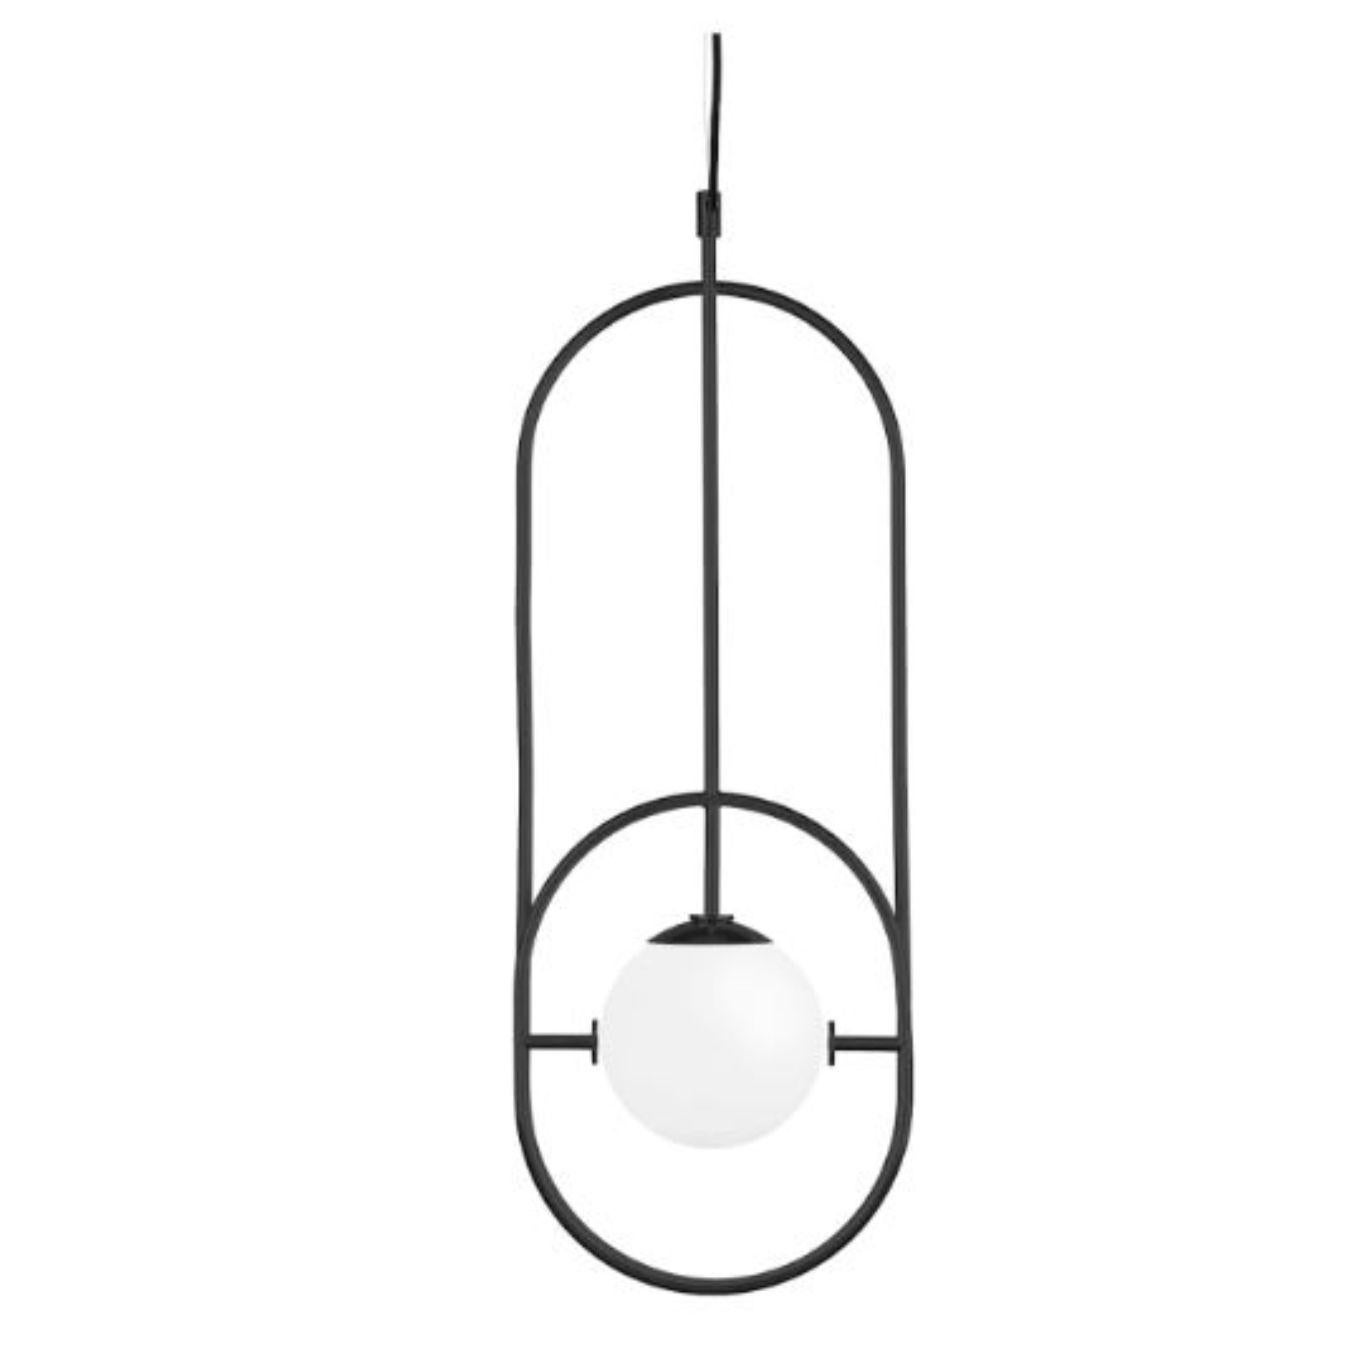 Black loop I suspension lamp by Dooq.
Dimensions: W 26.5 x D 15 x H 73 cm.
Materials: lacquered metal, polished or brushed metal.
Also available in different colours and materials. 

Information:
230V/50Hz
1 x max. G9
4W LED

120V/60Hz
1